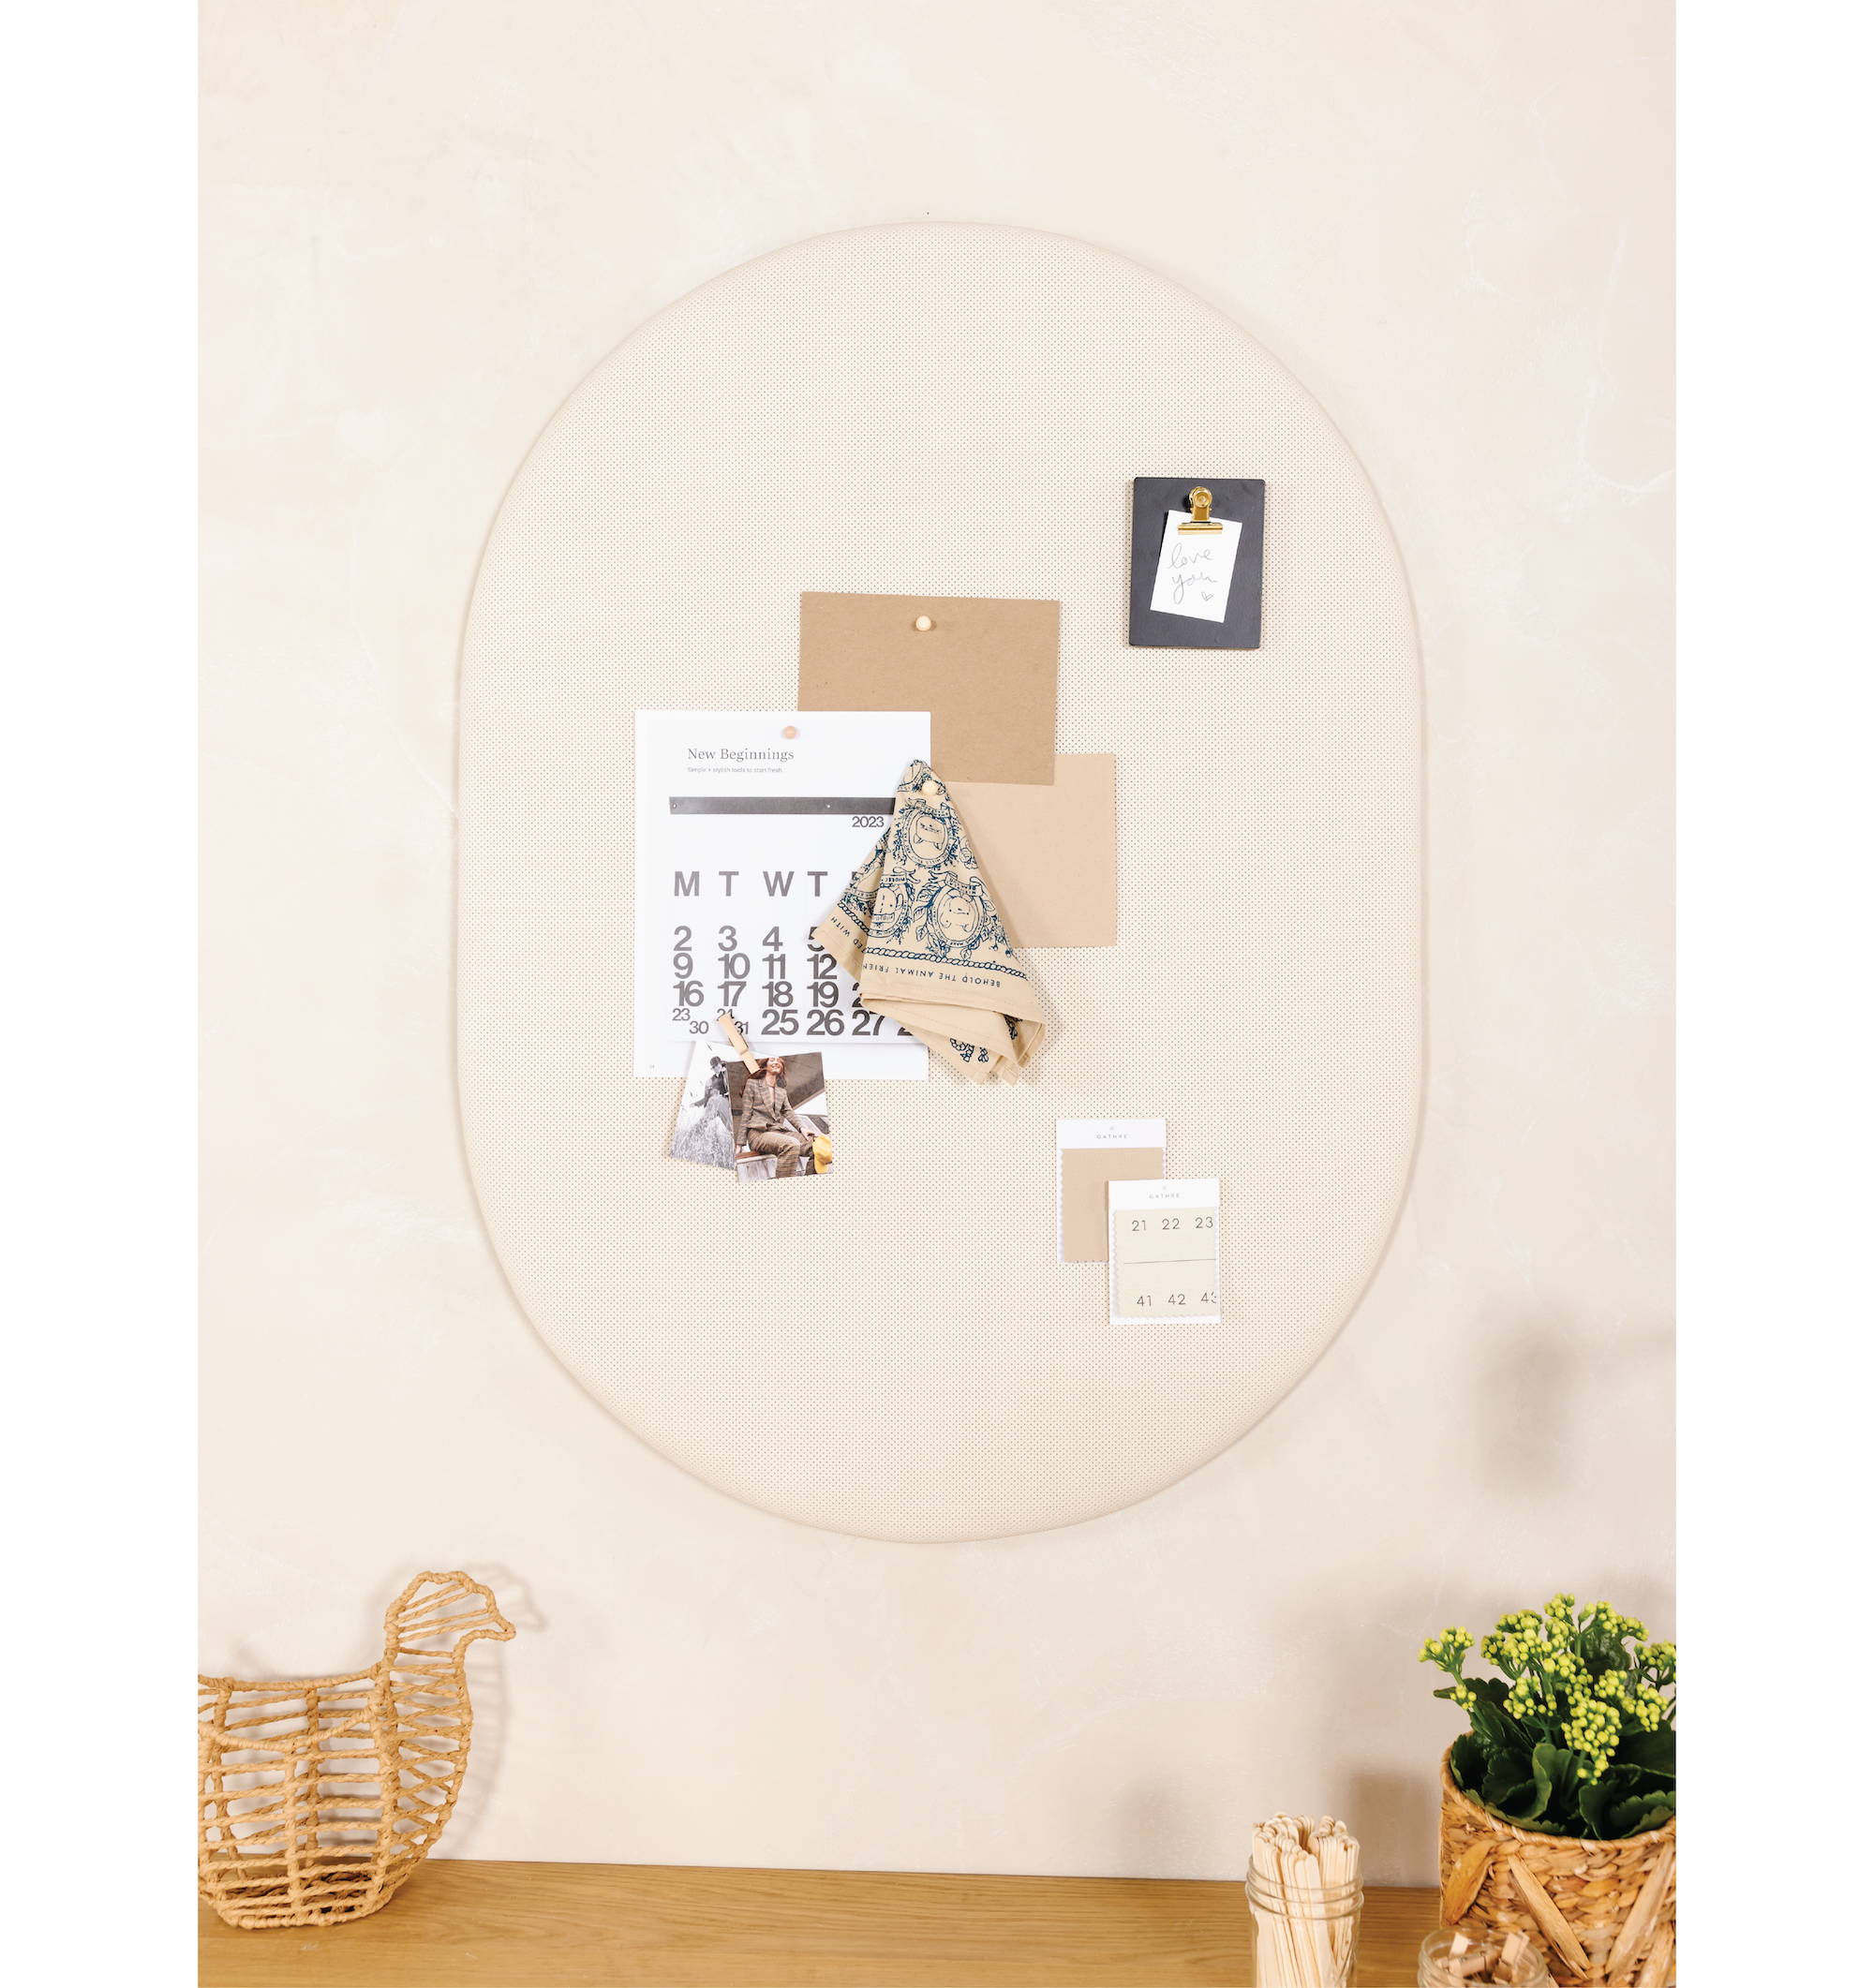 Pinboard in Ivory with papers and objects pinned to Pinboard